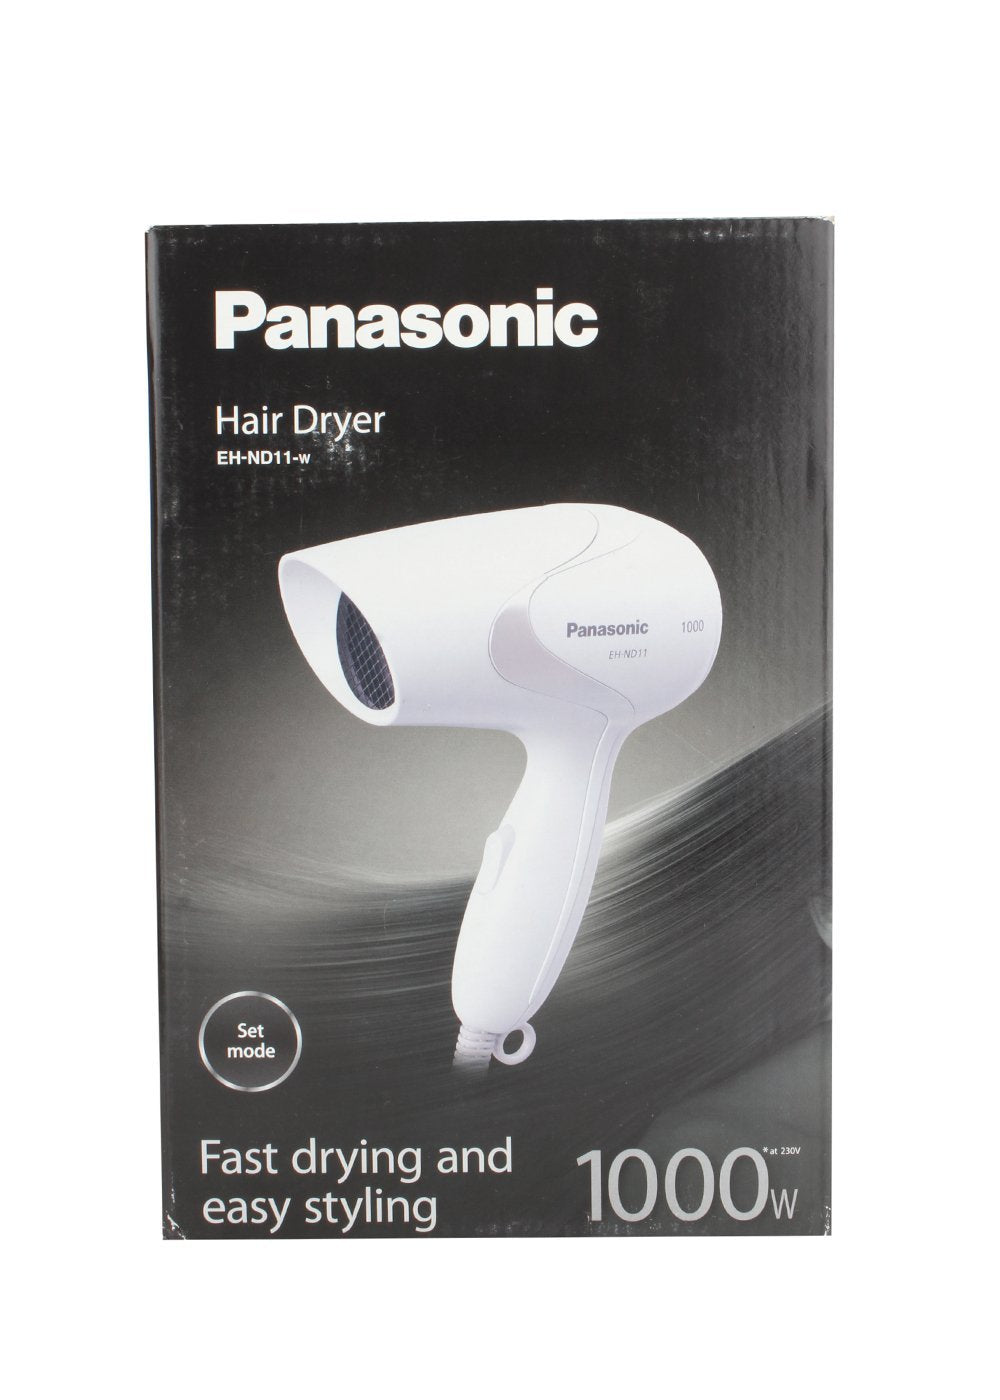 Panasonic Hair Dryer For Fast Drying and Easy Styling (1000w)